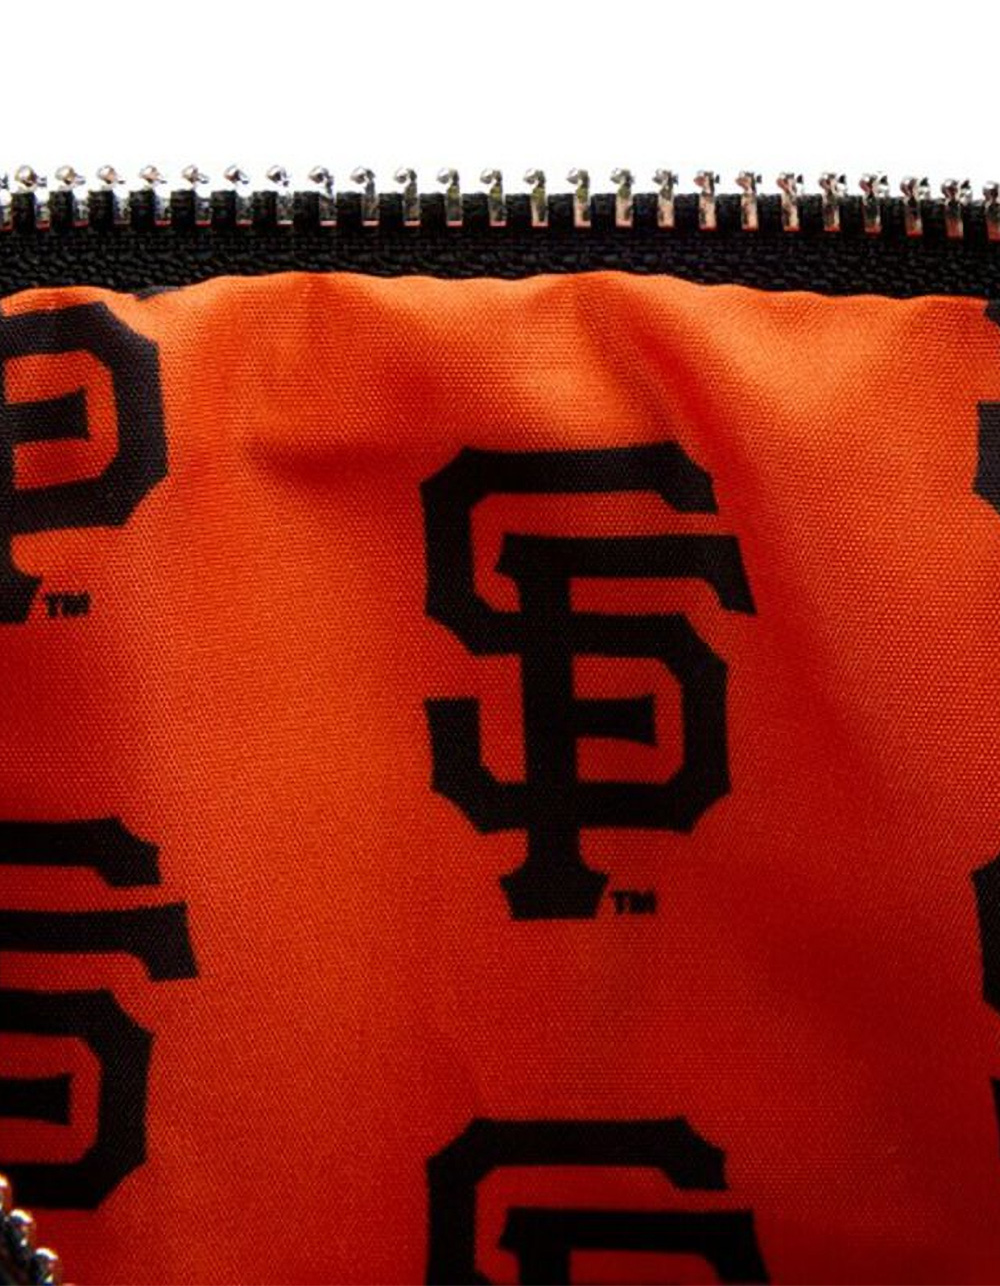 Buy MLB SF Giants Patches Mini Backpack at Loungefly.